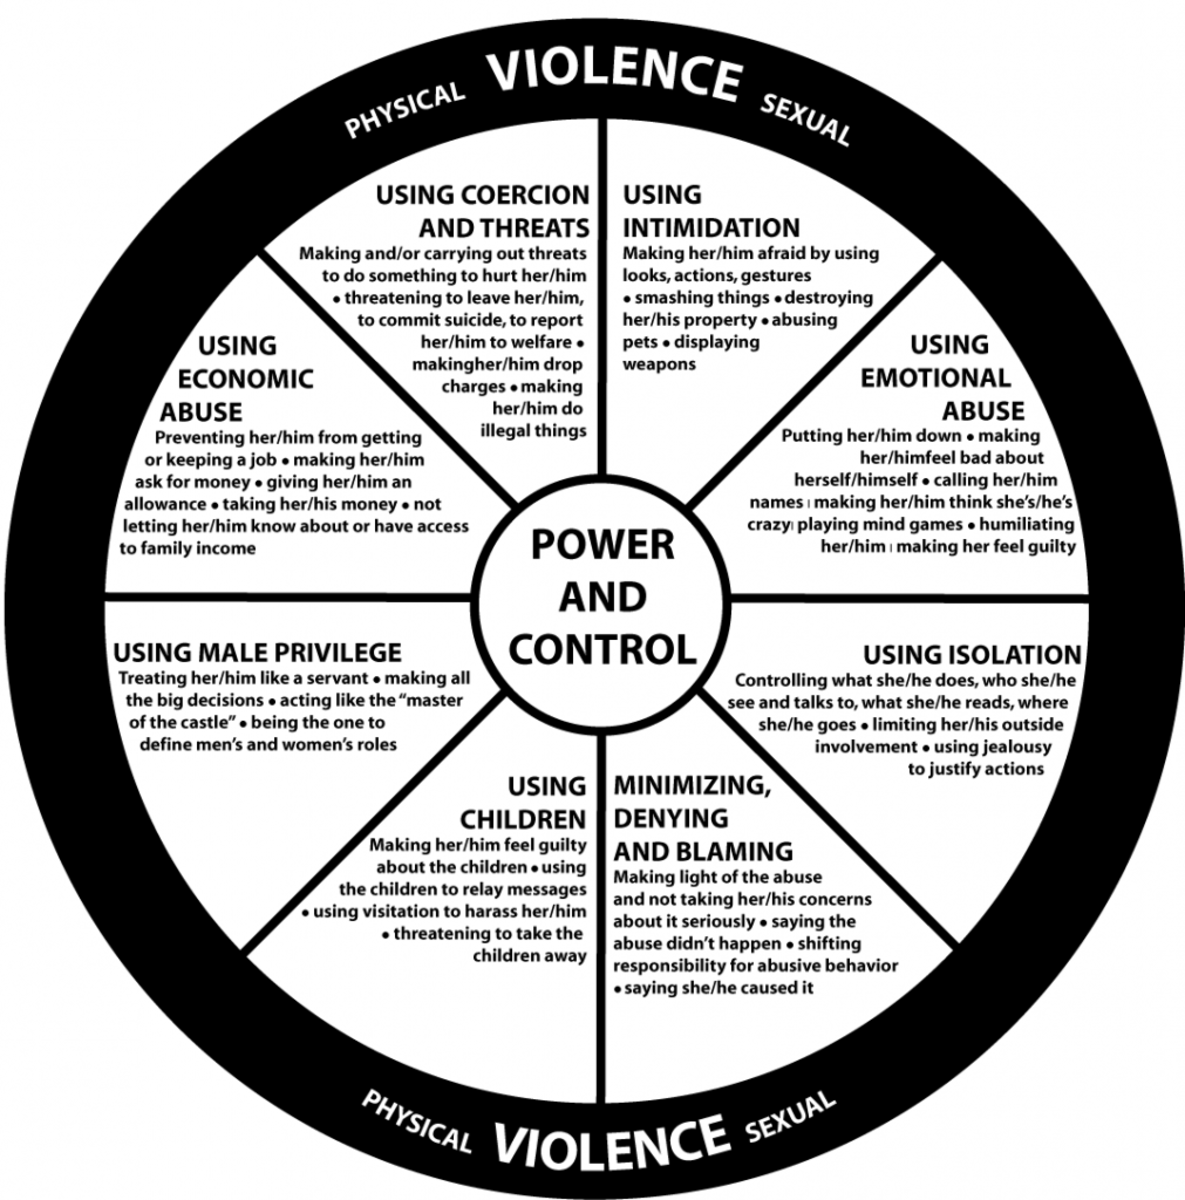 The Duluth Power and Control Wheel